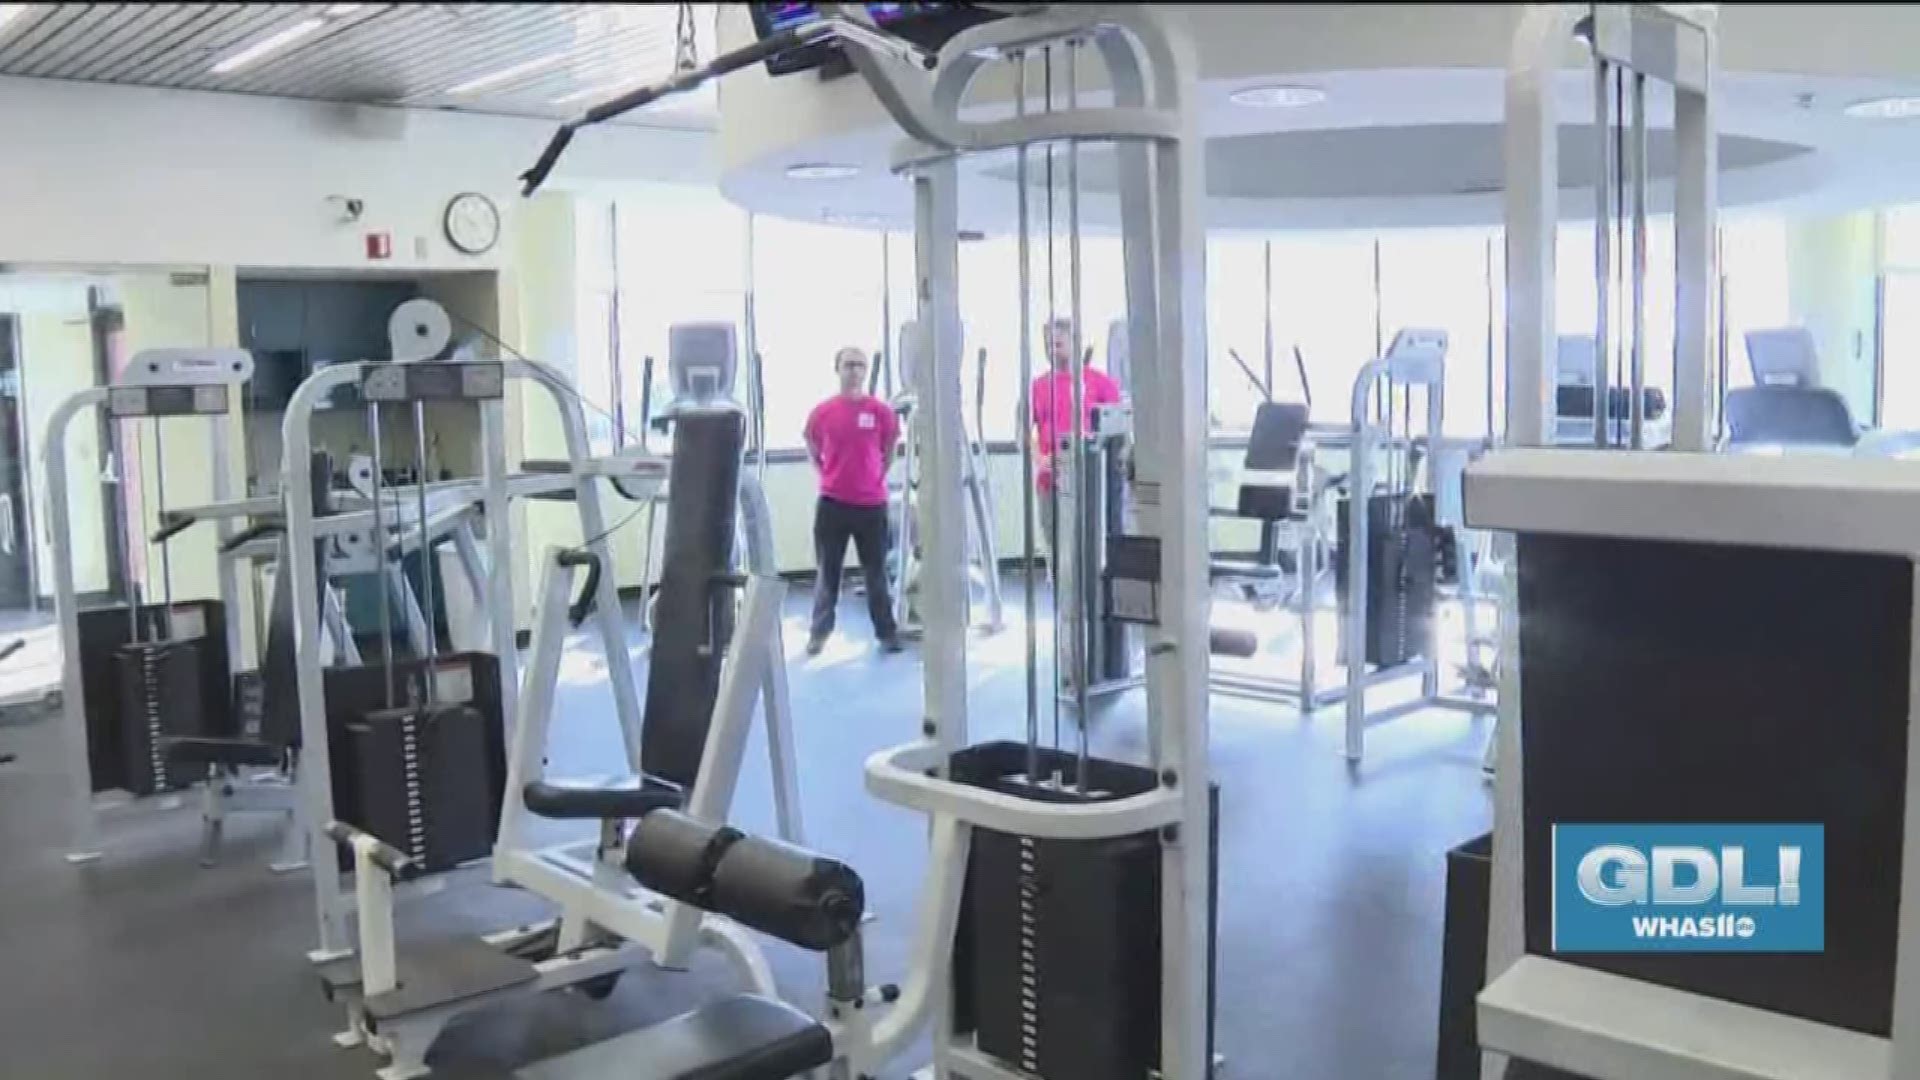 People battling cancer are welcome to free exercise classes at The J.